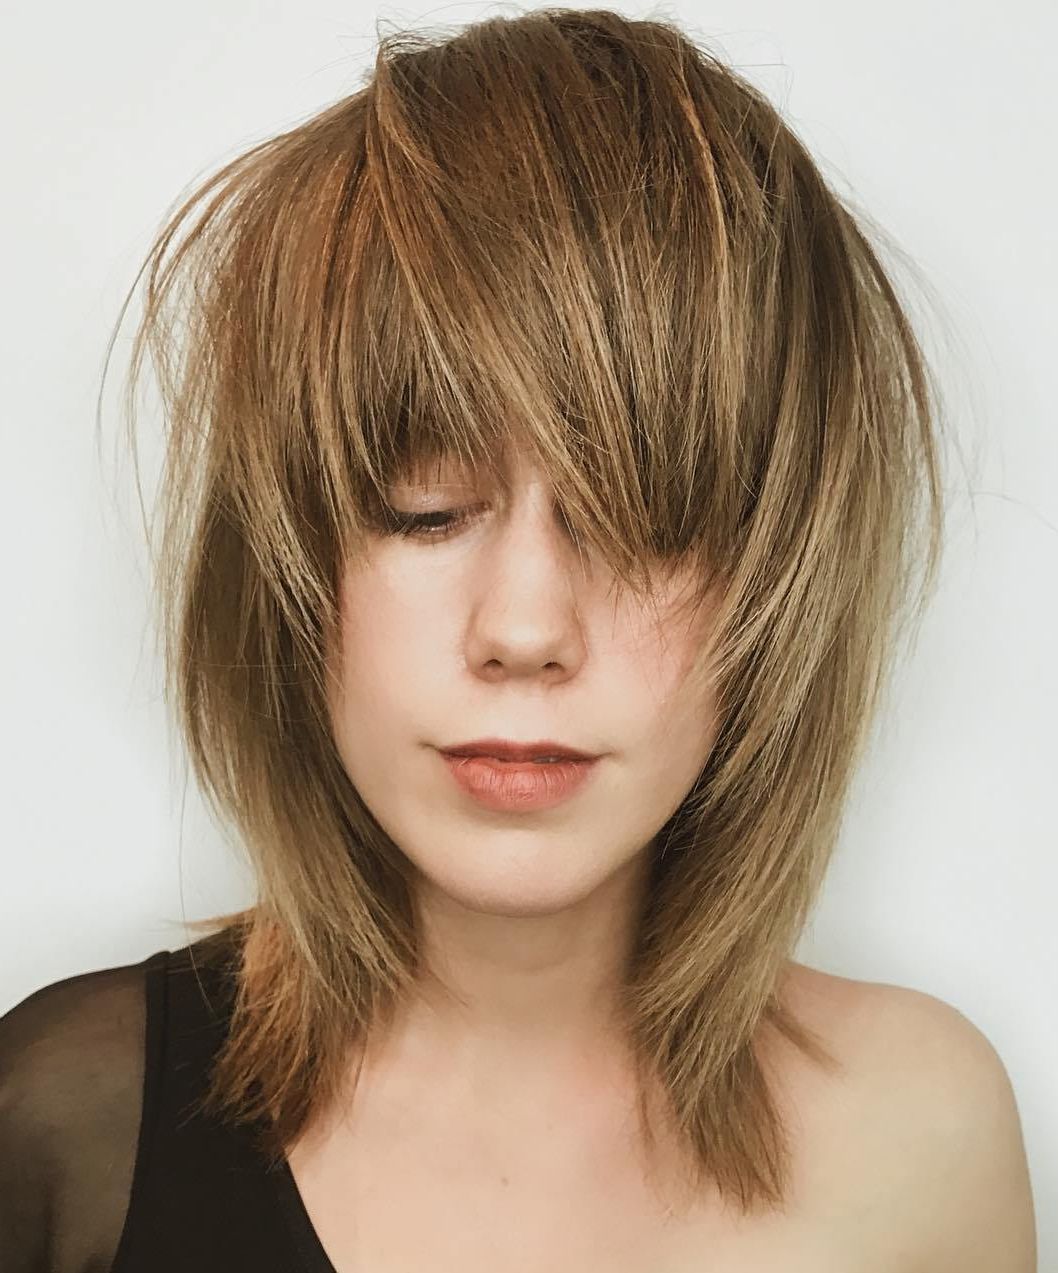 The Most Instagrammable Hairstyles With Bangs In 2019 With Widely Used Golden Bronde Razored Shag Haircuts For Long Hair (View 7 of 20)